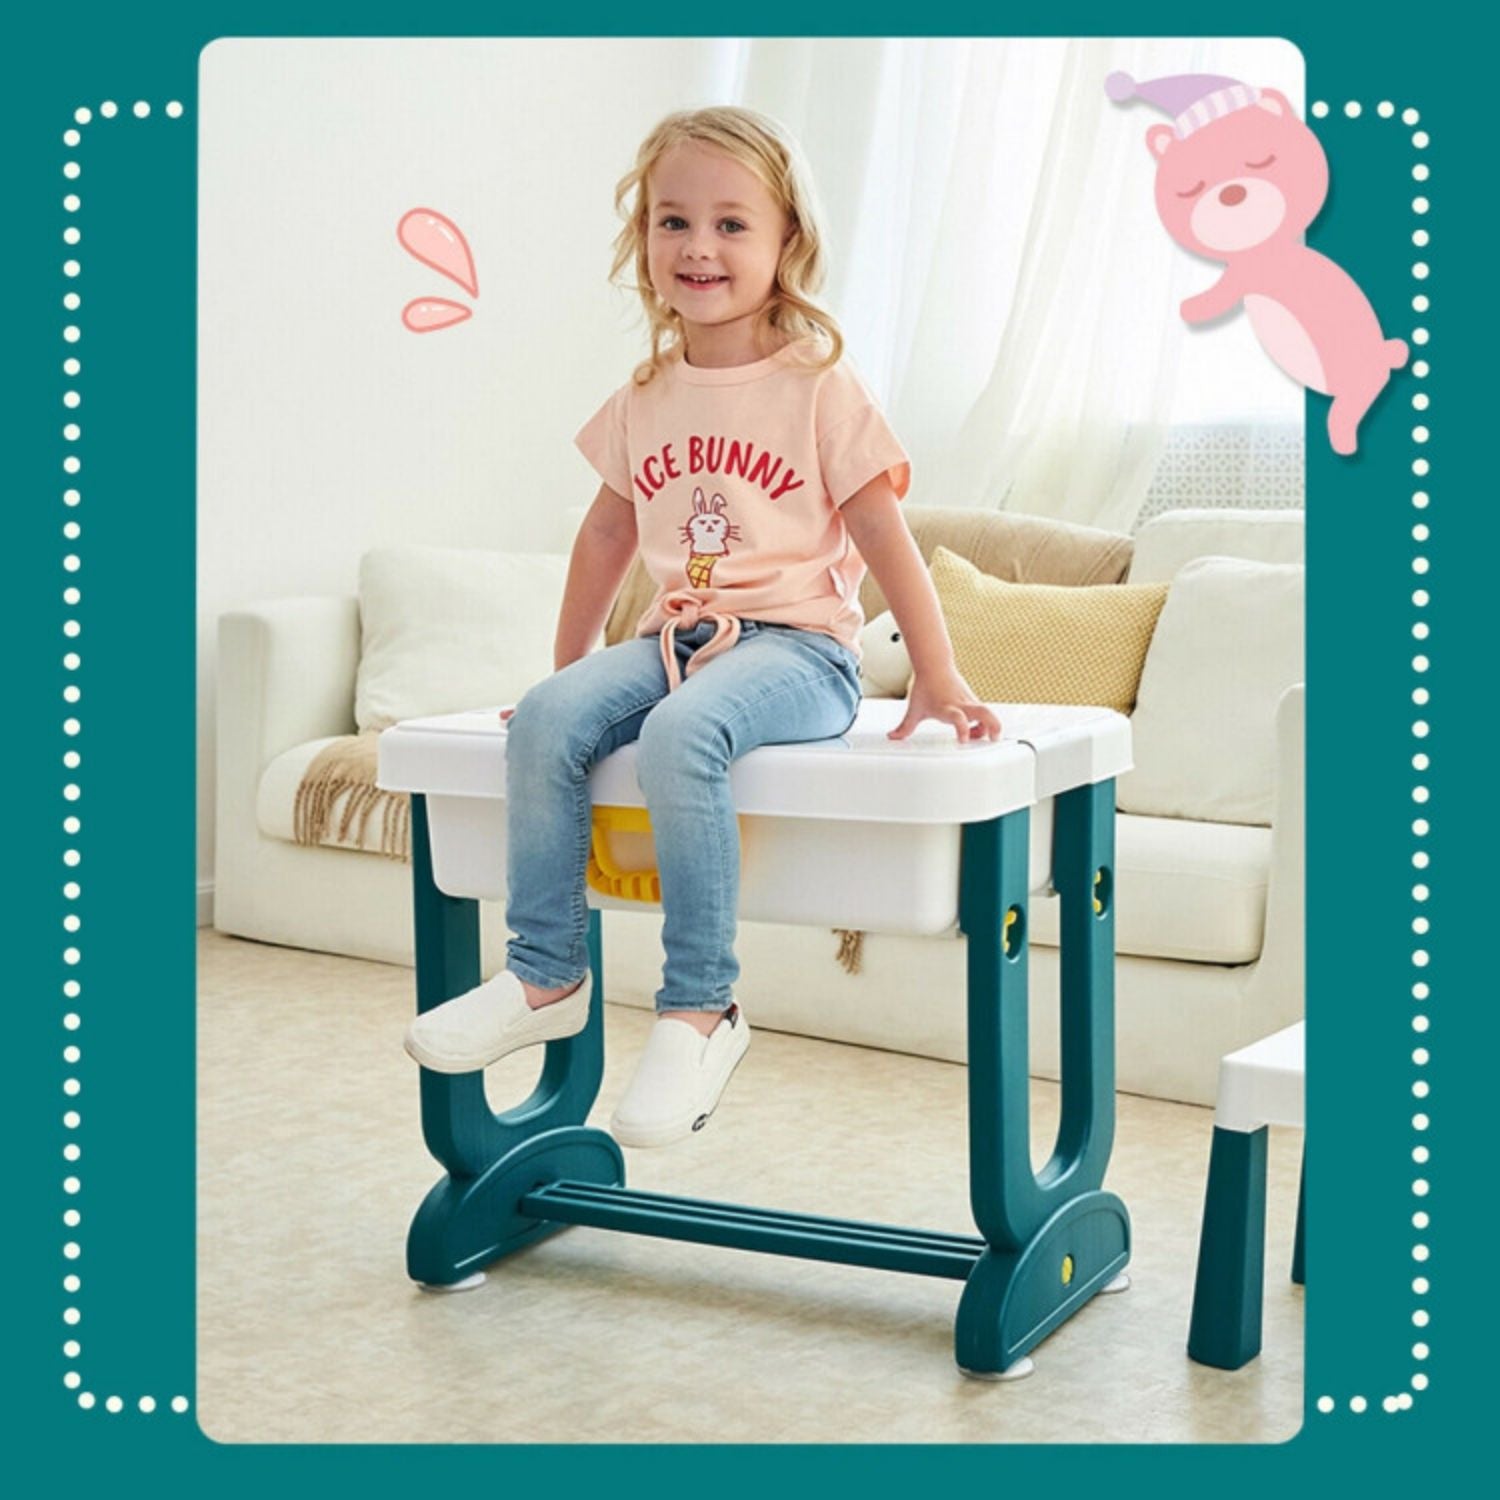 SUGIFT 5-in-1 Kids Activity Table Set